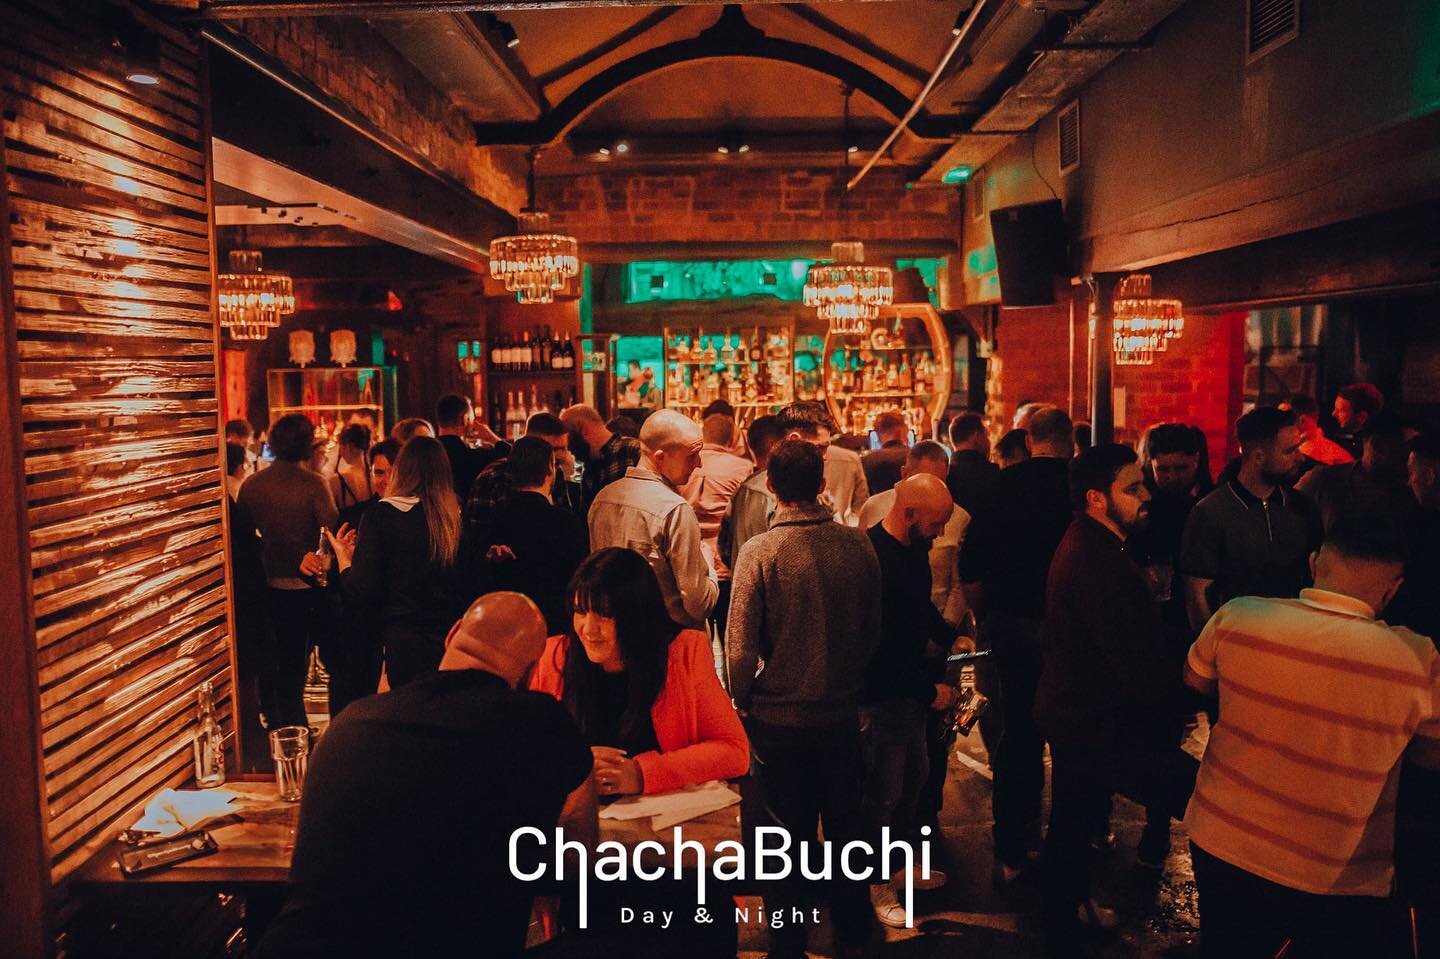 Another Busy Week @chachabuchinewcastle incoming! Be quick, as tables are filling up for the weekend! 🧡